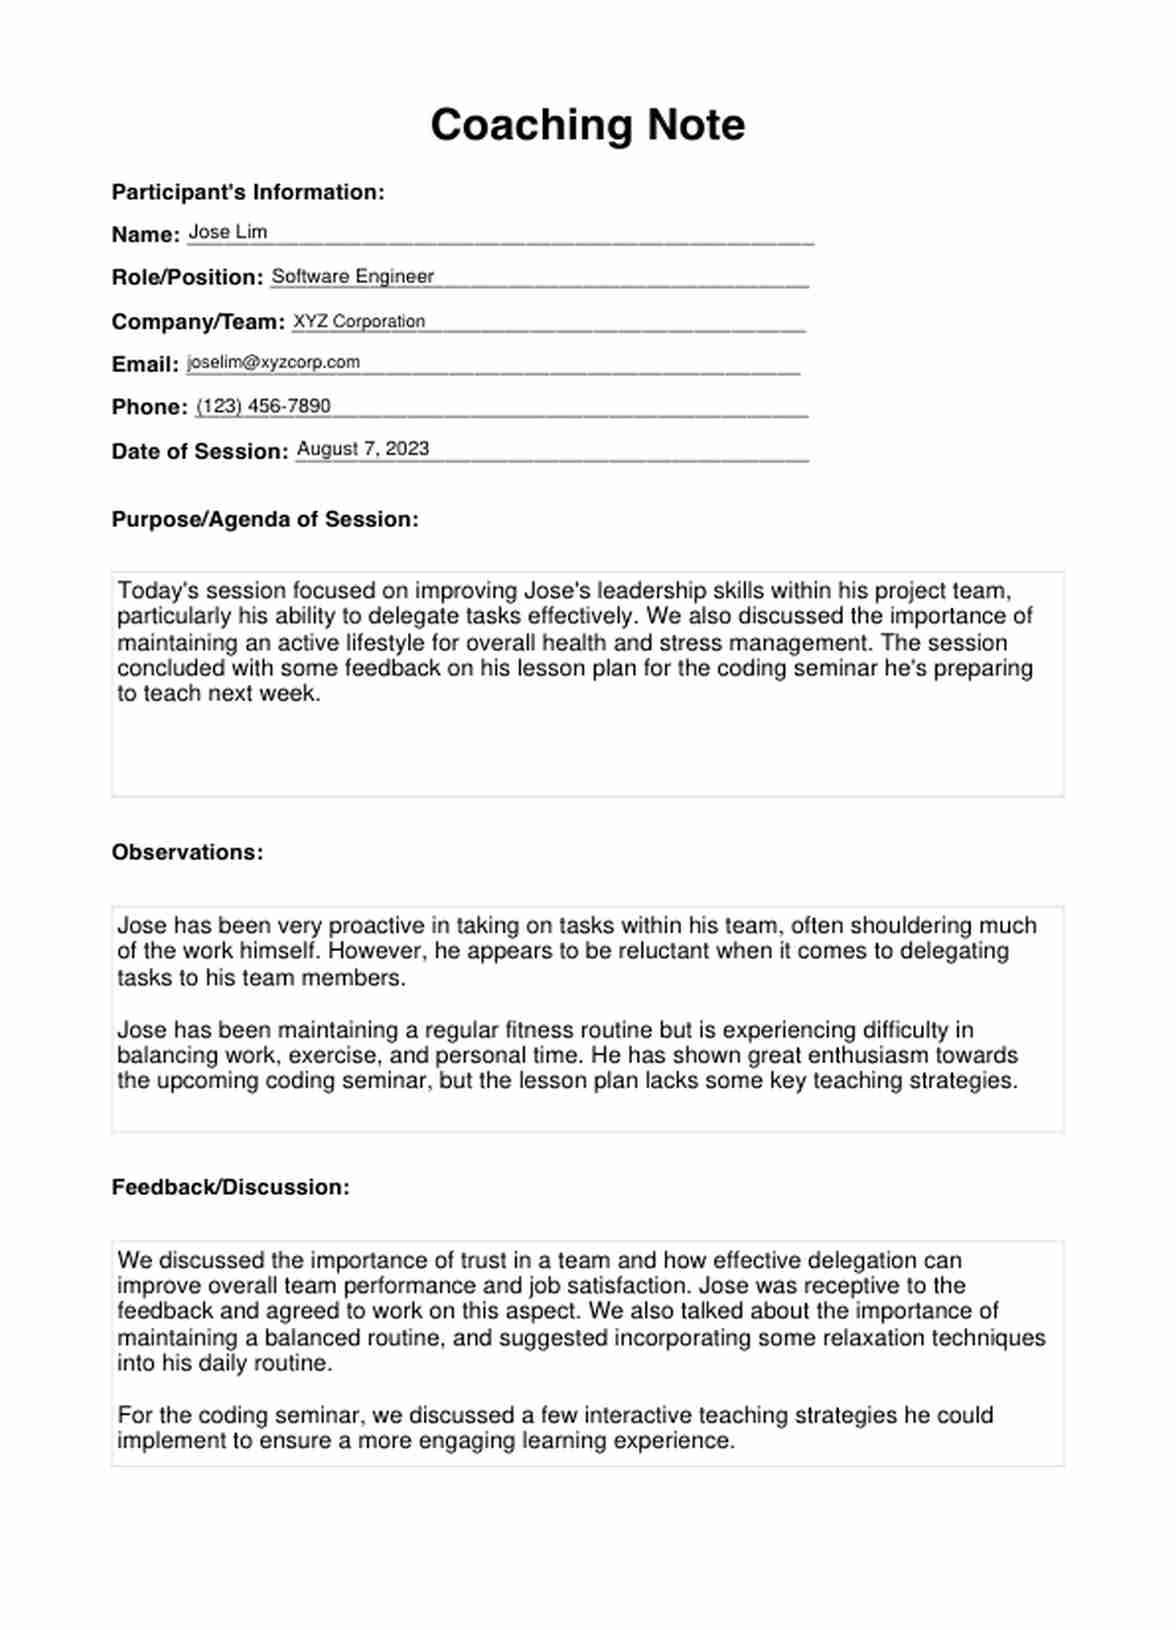 Coaching Note Templates PDF Example